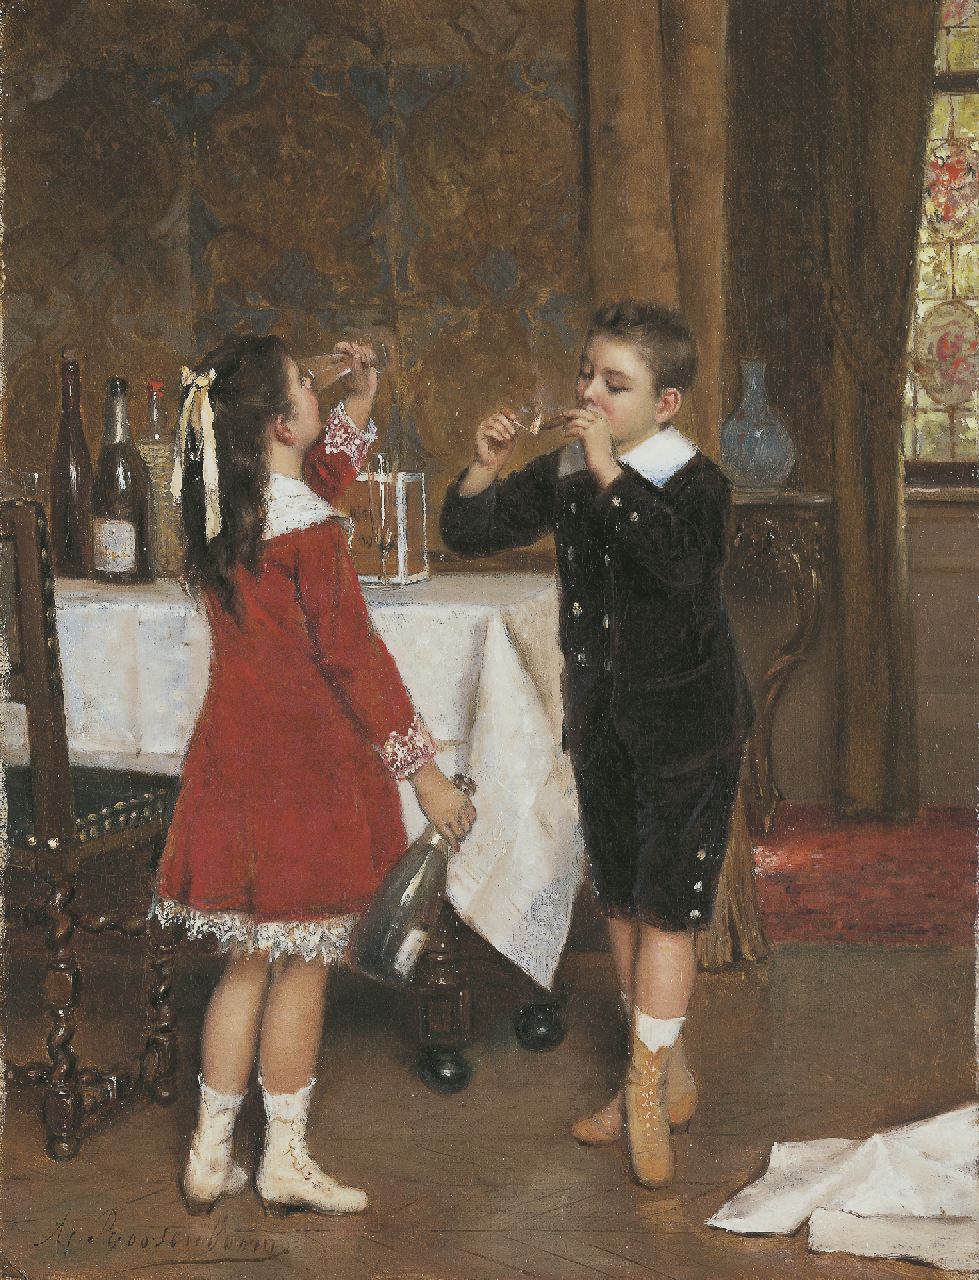 Roosenboom A.  | Albert Roosenboom, After the party, Öl auf Leinwand 34,2 x 26,4 cm, signed l.l. und dated 1882 on the reverse